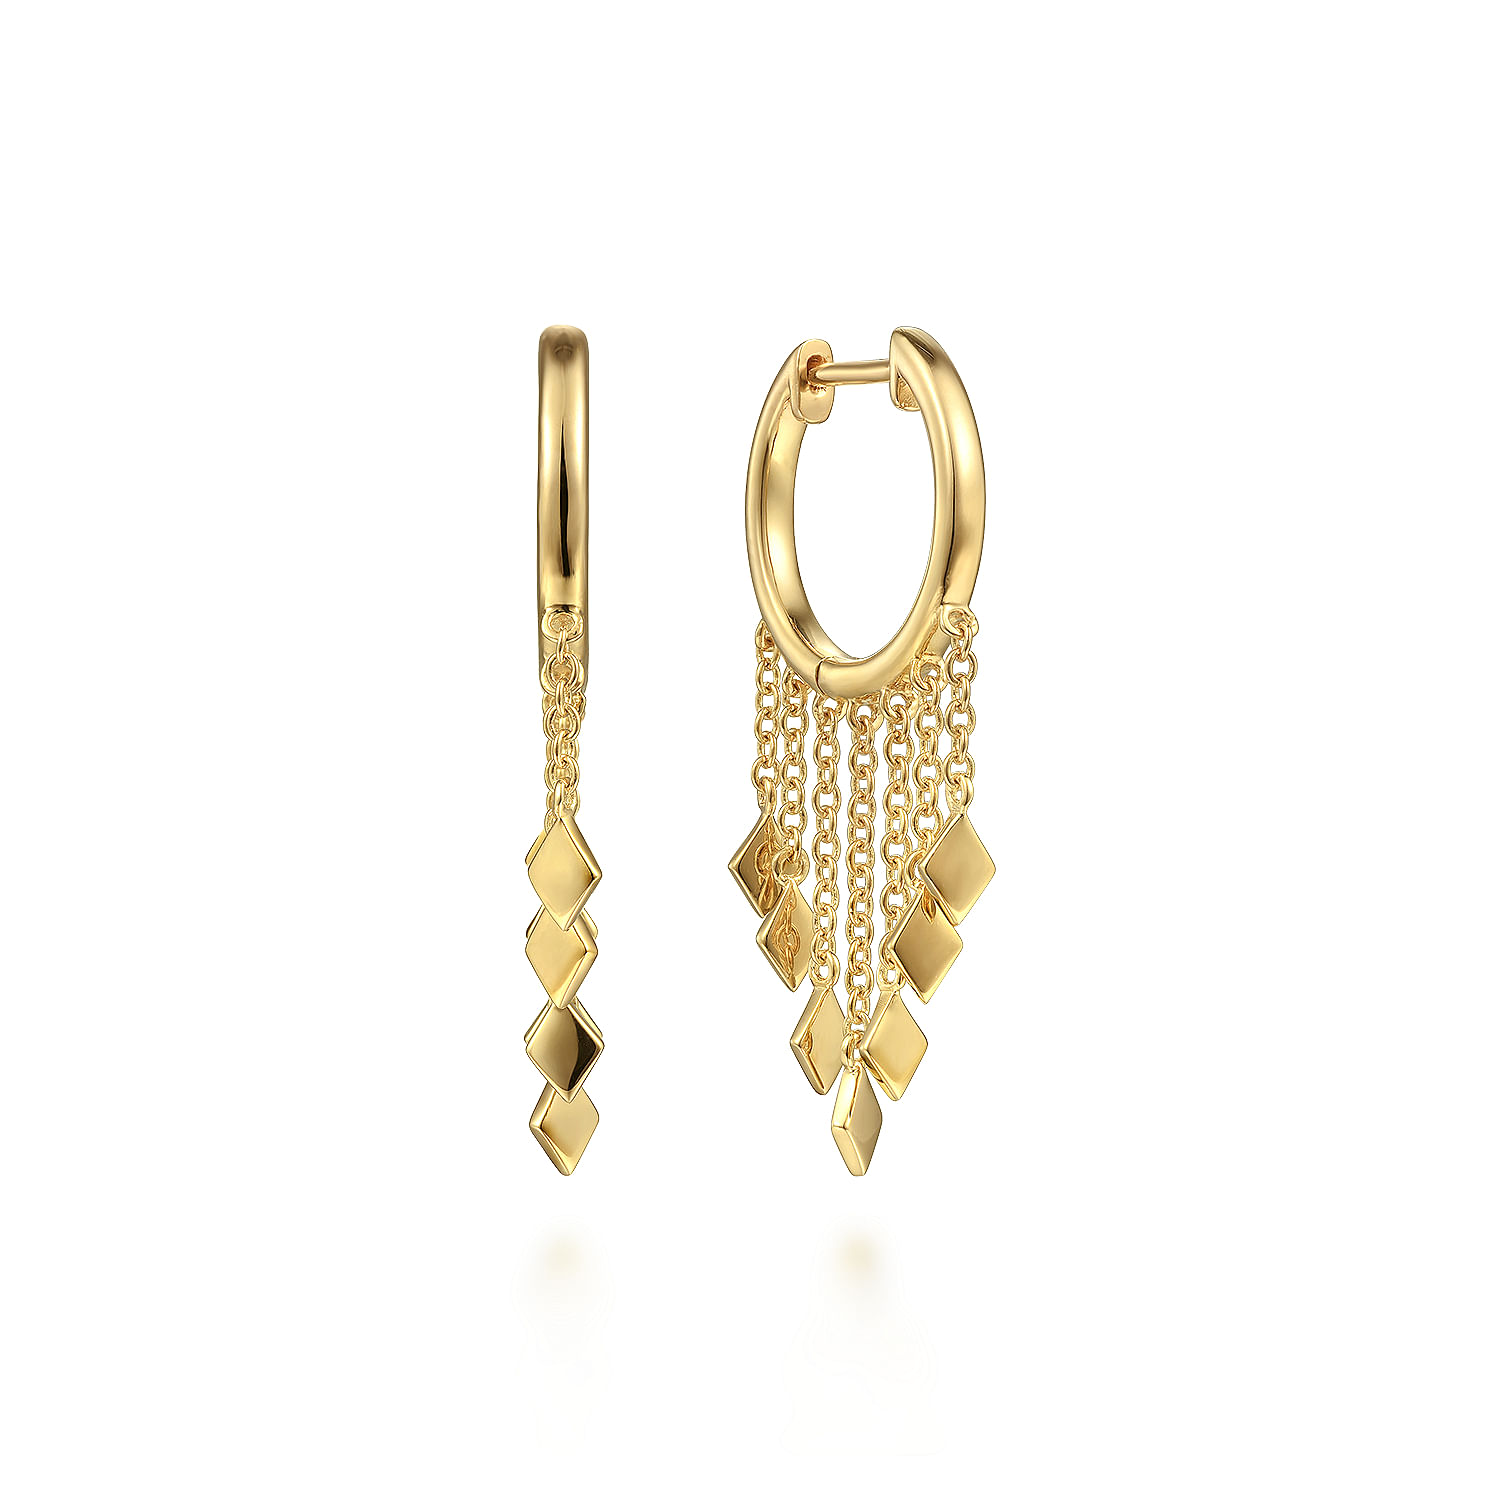 14K Yellow Gold Huggie Earrings with Chain and Diamond Tassel Drops